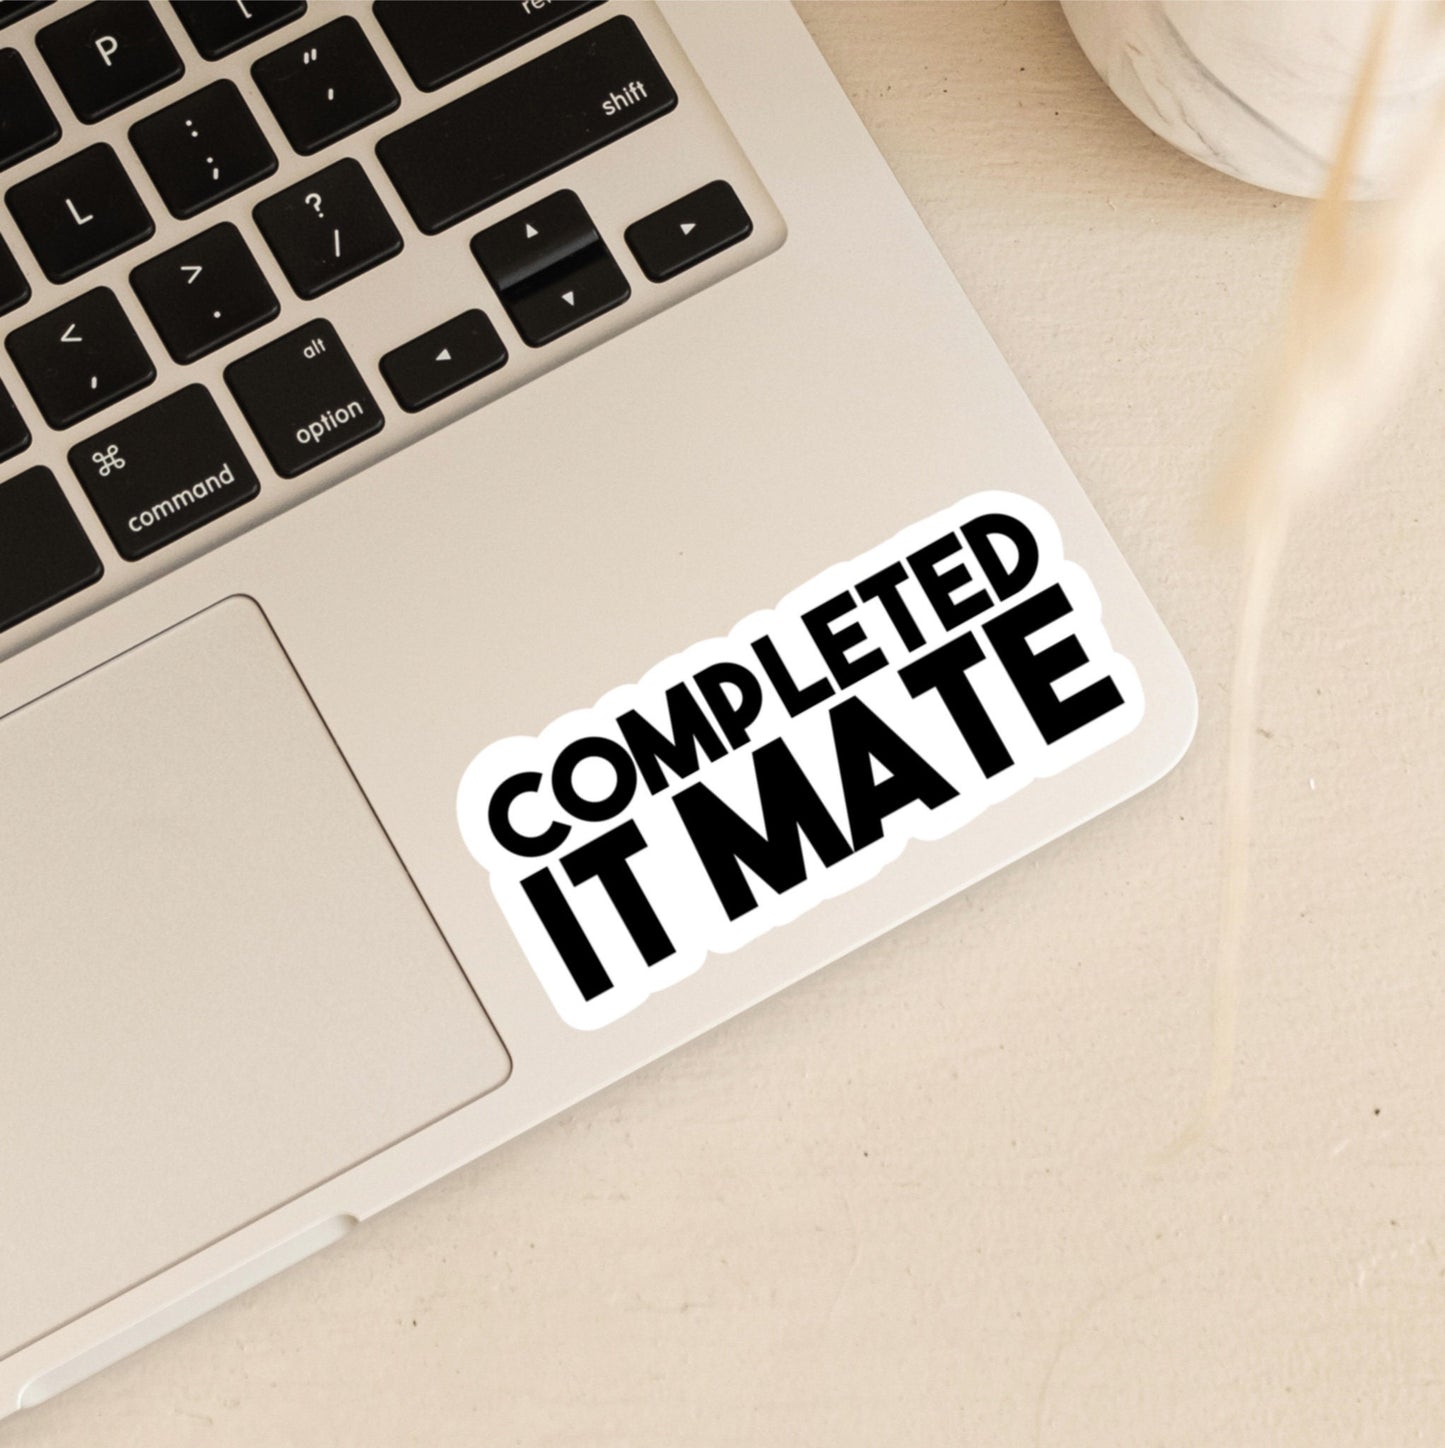 Completed It Mate Sticker | Jay Inbetweeners | Inbetweeners Stickers | UK Stickers